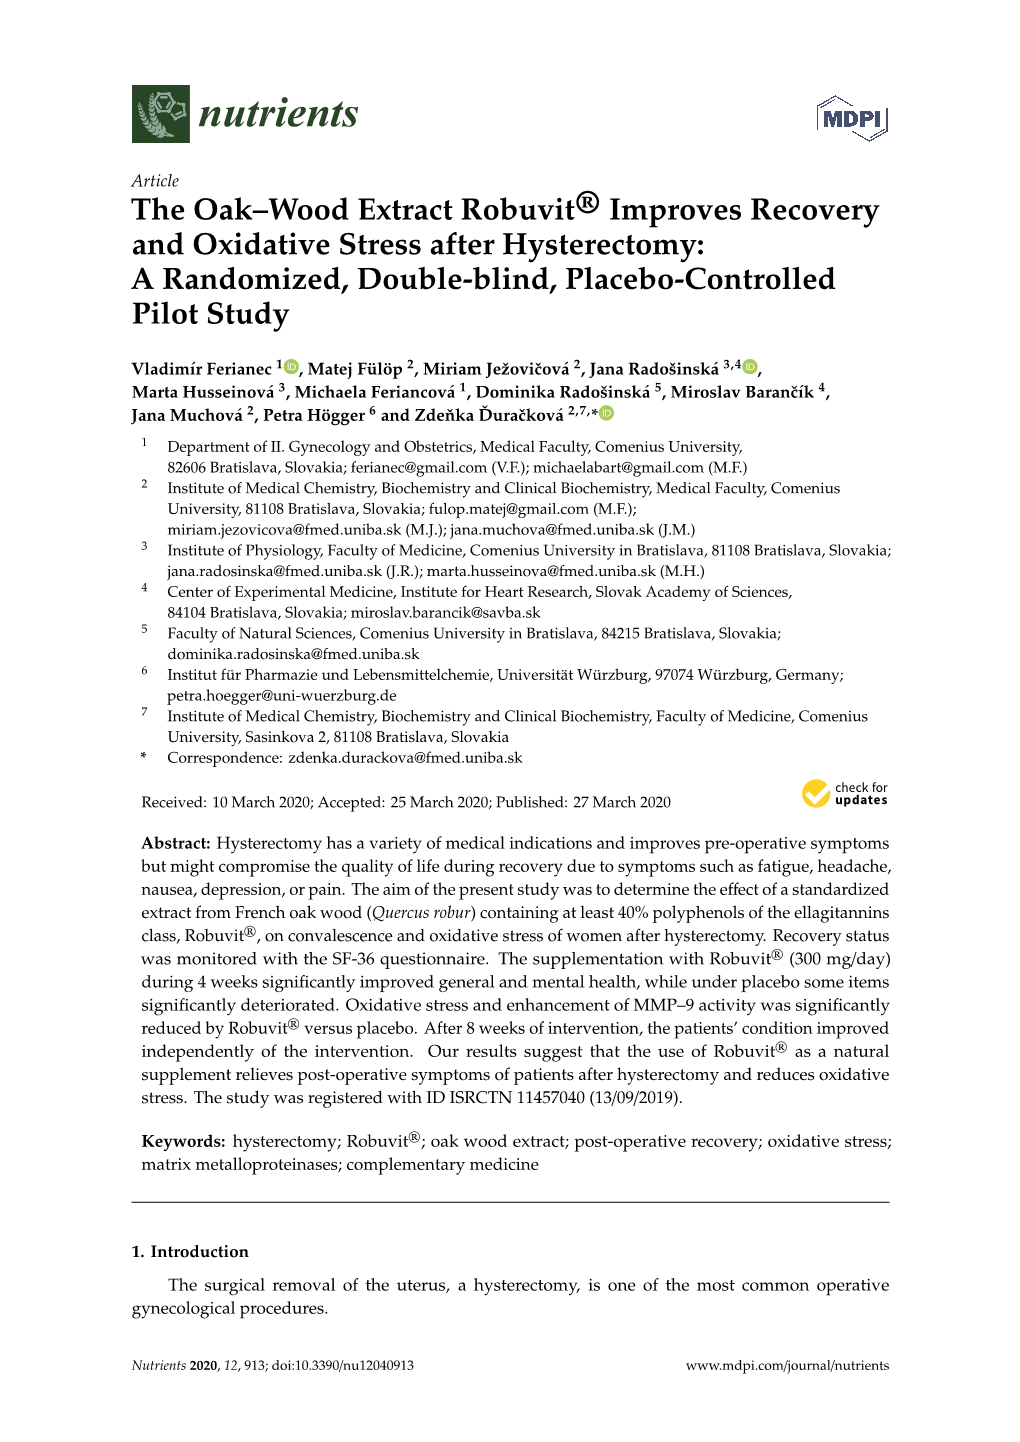 The Oak–Wood Extract Robuvit® Improves Recovery and Oxidative Stress After Hysterectomy: a Randomized, Double-Blind, Placebo-Controlled Pilot Study